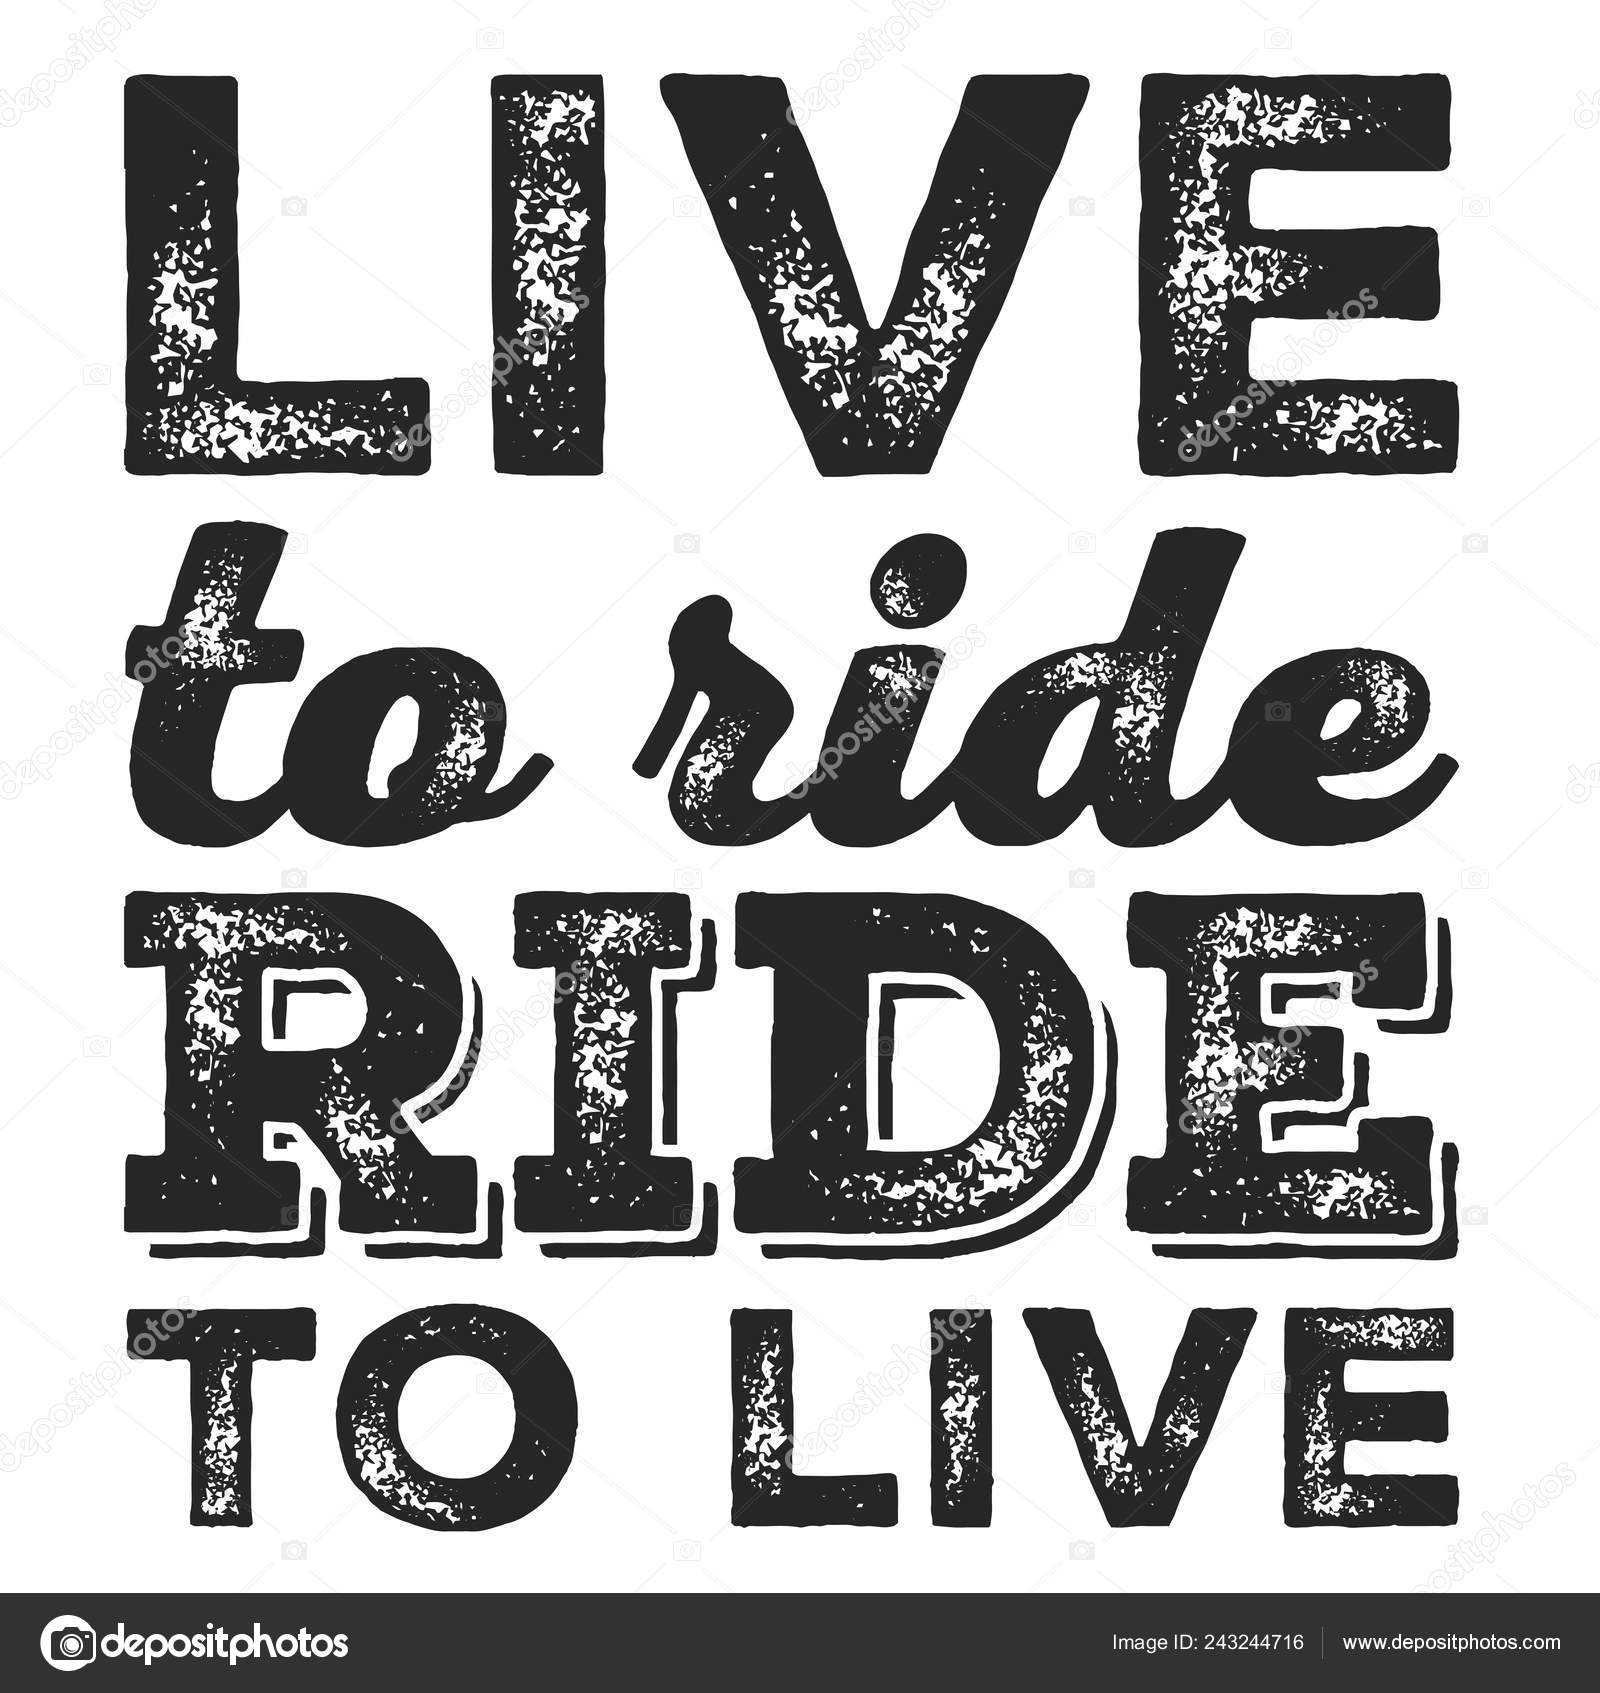 Love to Ride a Motorcycle Quotes lepni.me Mens T-Shirt Think Outside The Box Gear for Motorbike Riders